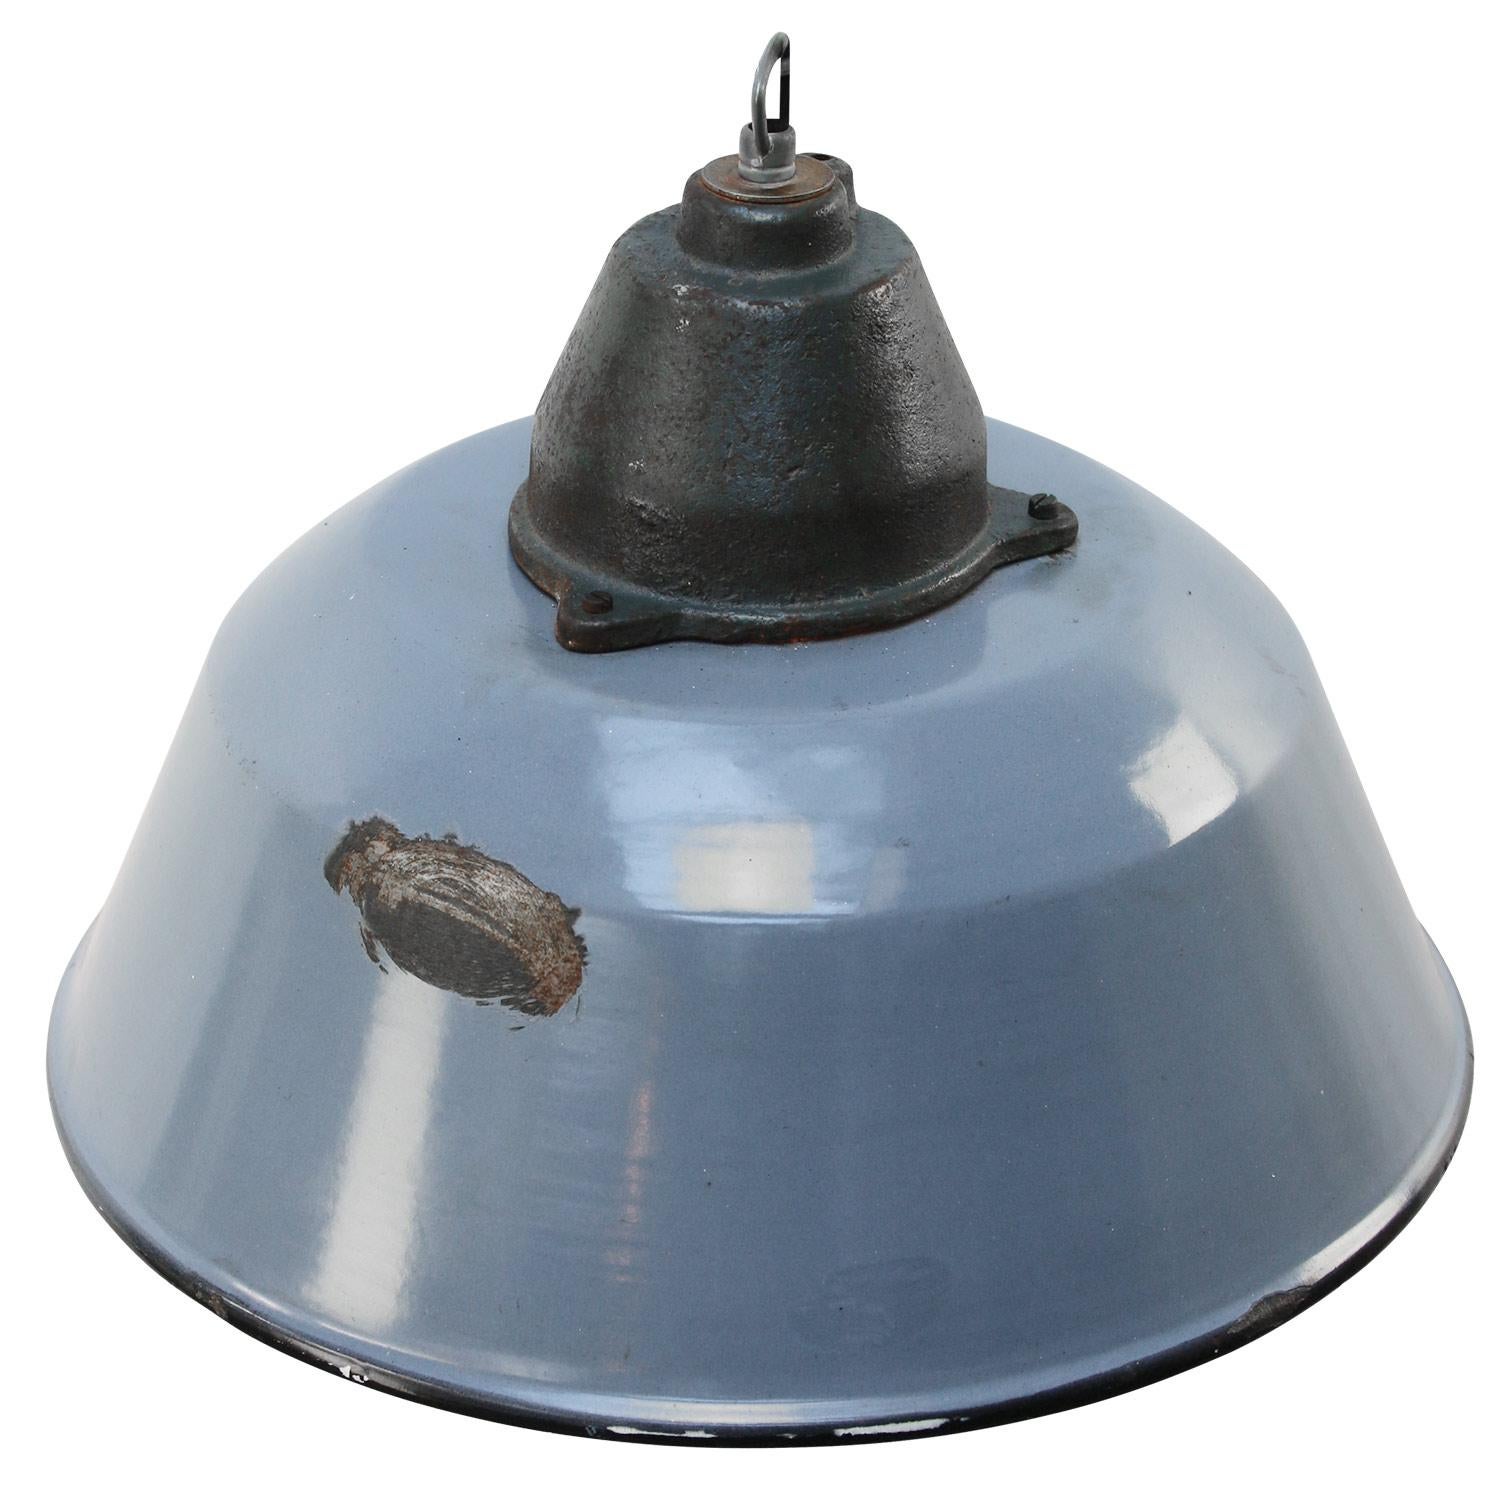 Factory pendant. Gray enamel white interior. Cast iron top with clear glass.

Measures: Weight 3.4 kg / 7.5 lb

Priced per individual item. All lamps have been made suitable by international standards for incandescent light bulbs, energy-efficient